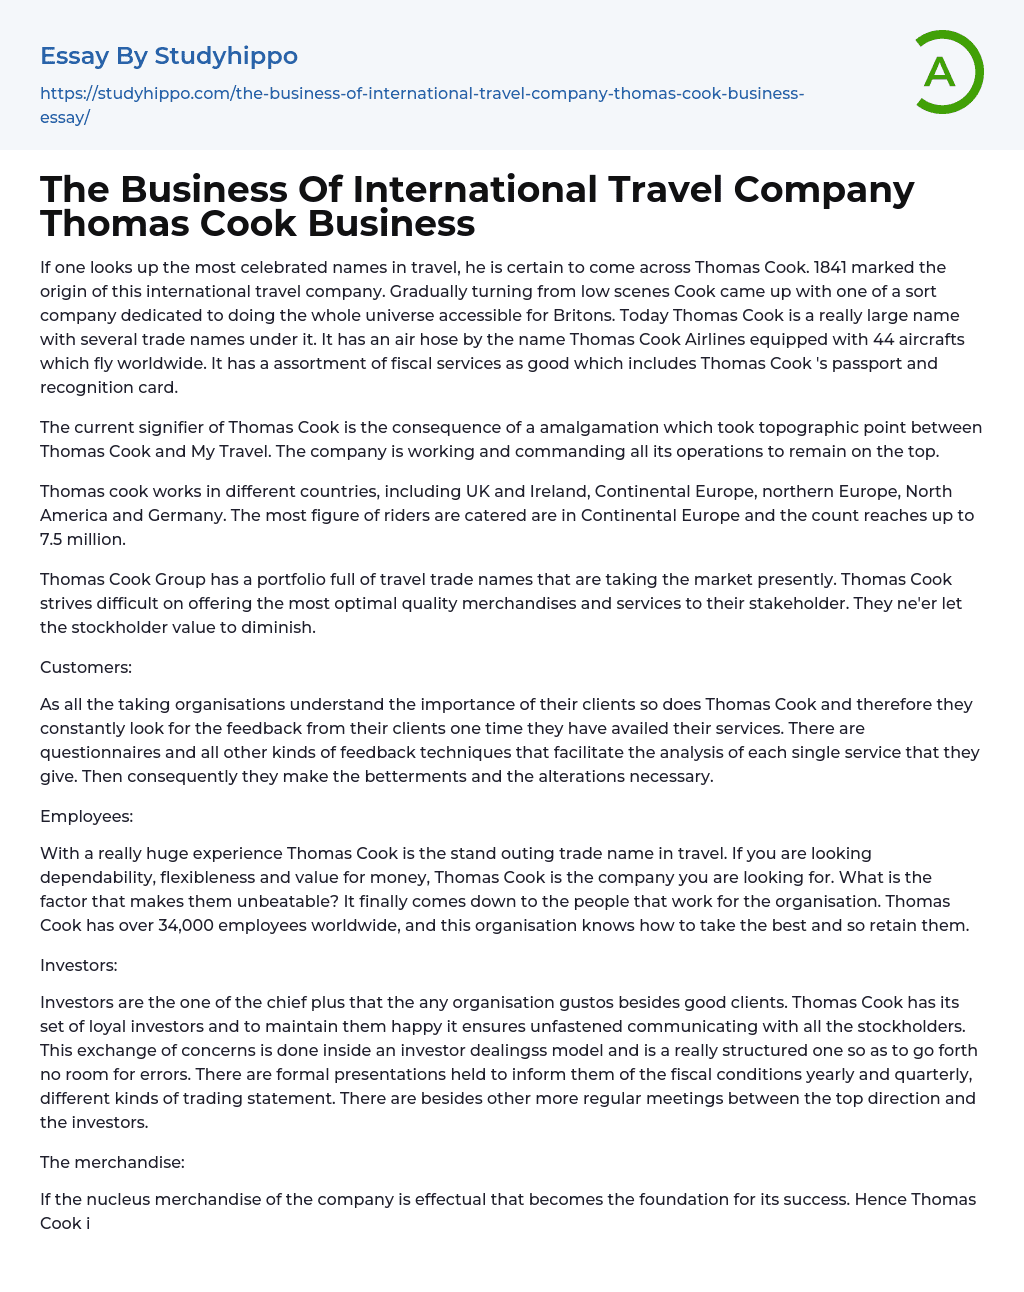 The Business Of International Travel Company Thomas Cook Business Essay Example